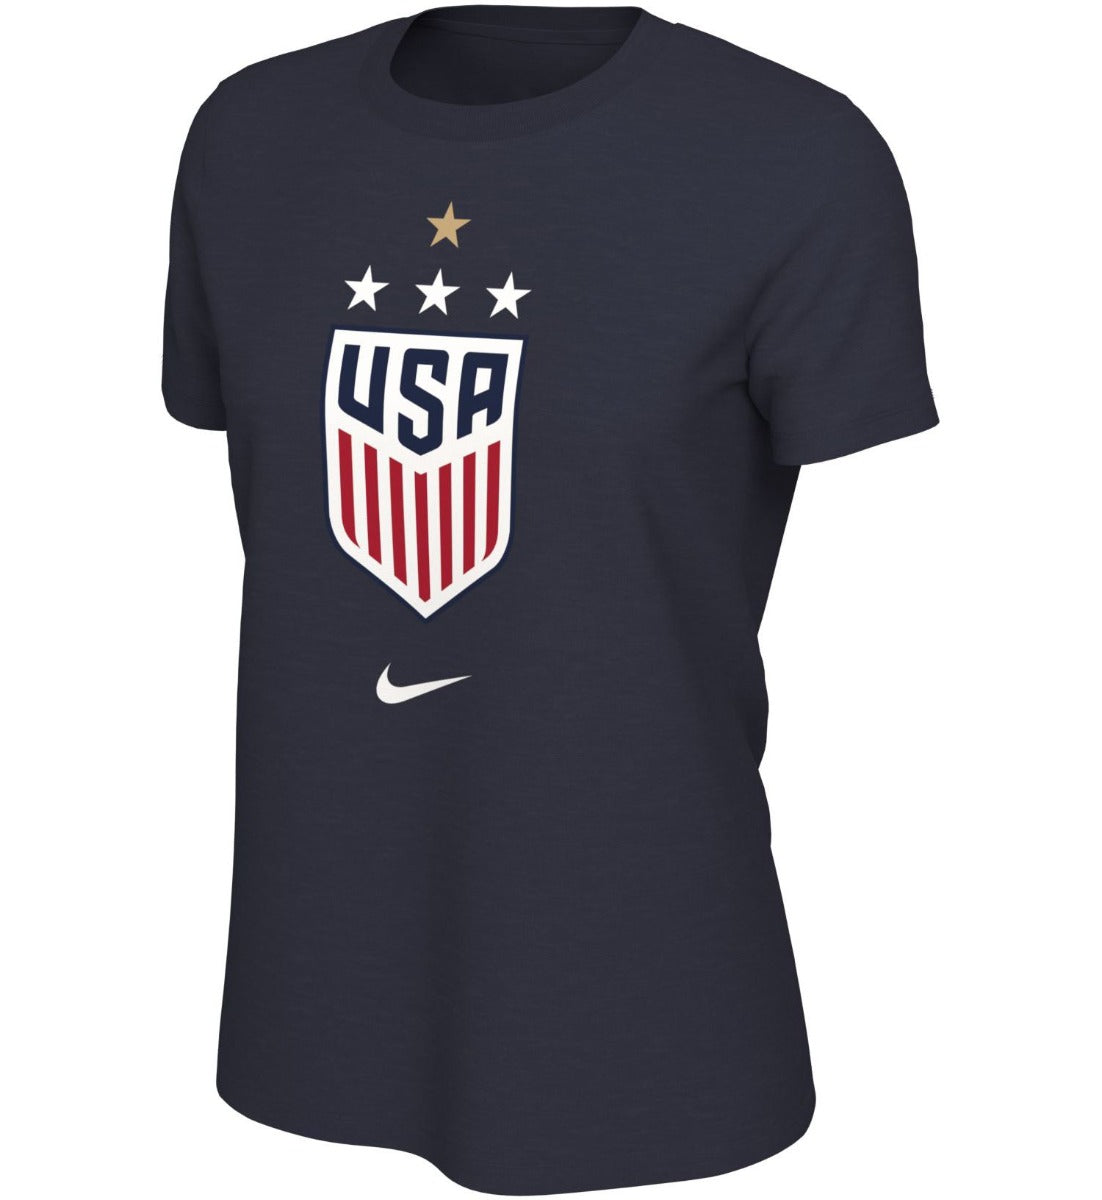 Nike 2019 Women's World Cup 4-Star Champions Crest Tee - Navy